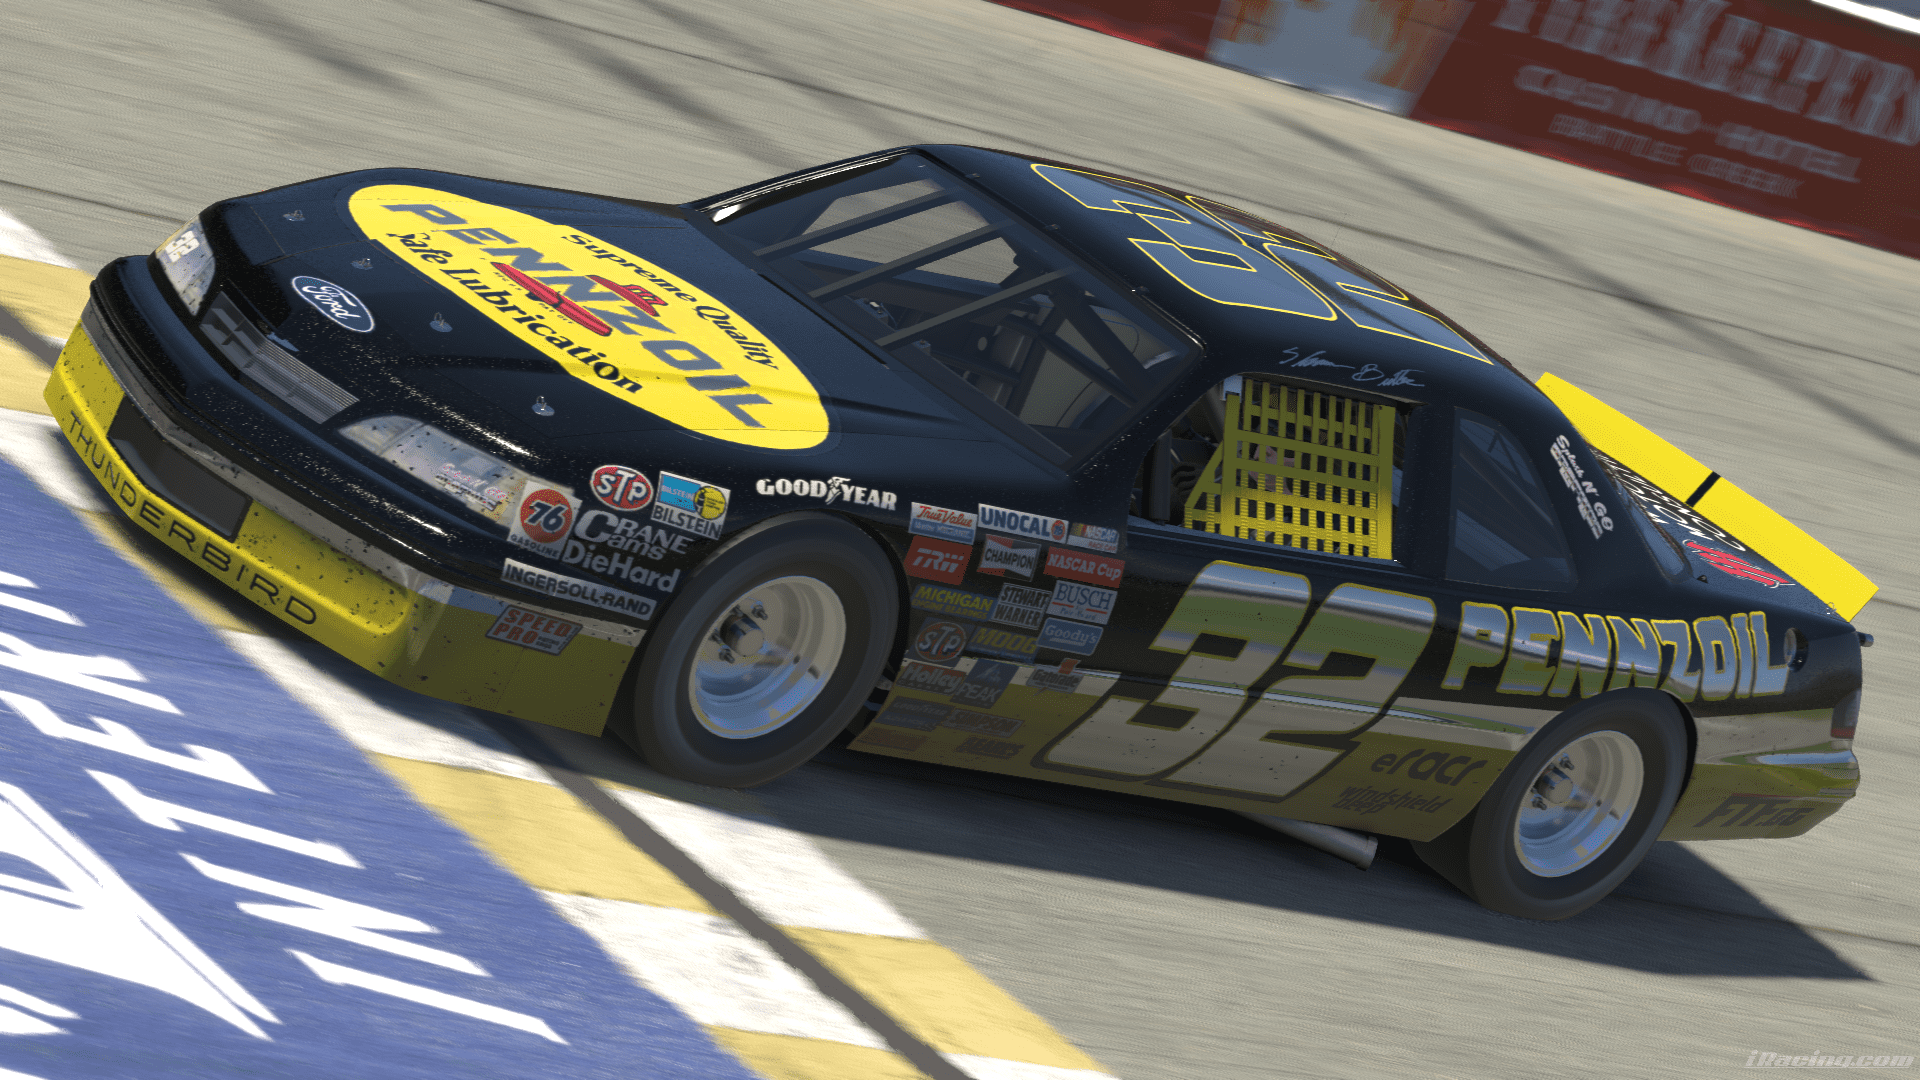 Shawn Butler finds redemption with a win in the Legends of the Future Series at Michigan International Speedway.